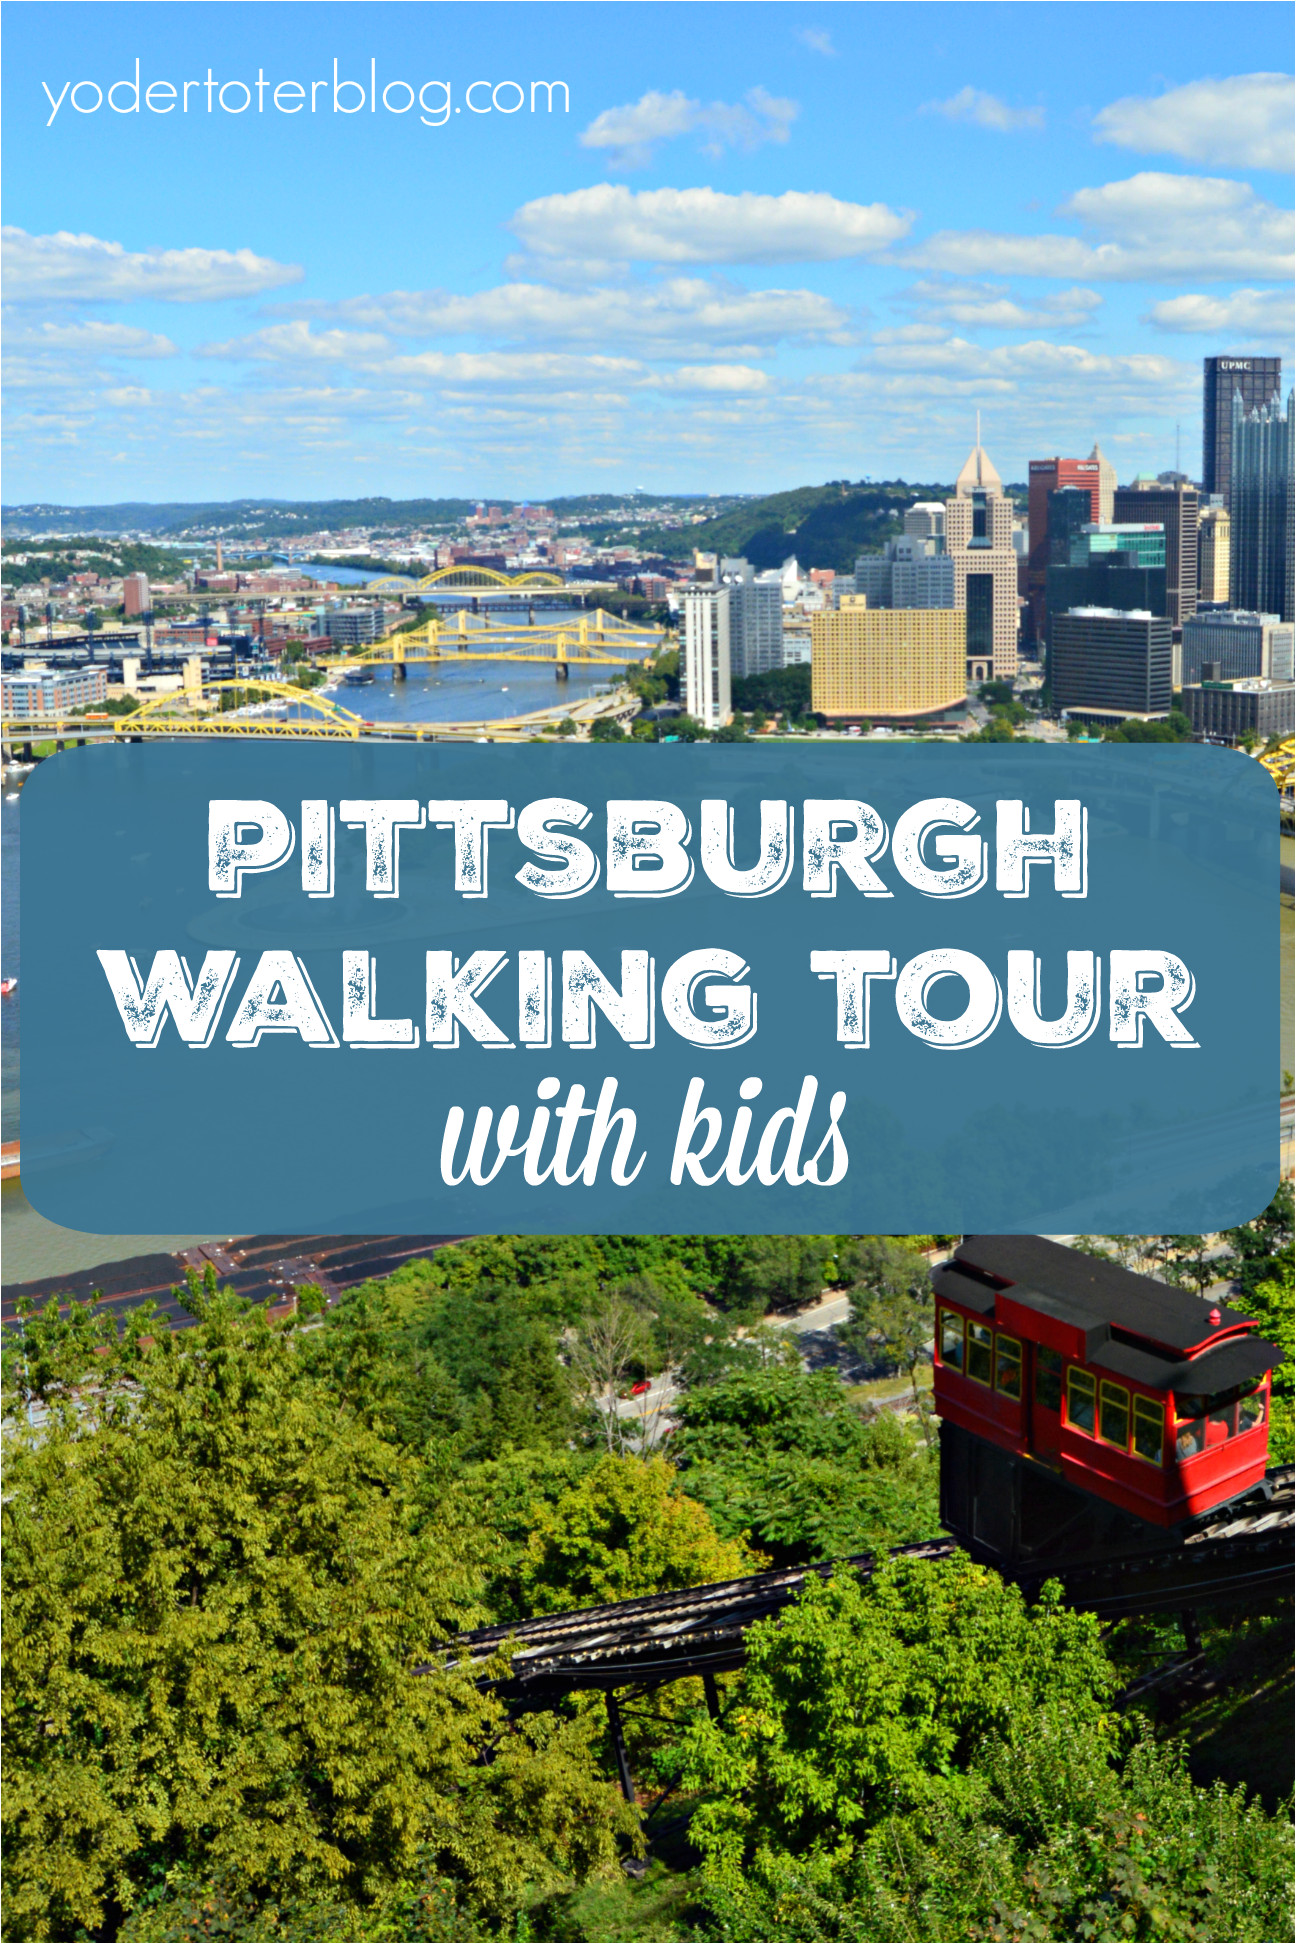 190 best pittsburgh with kids images in 2019 travel articles pittsburgh family trips